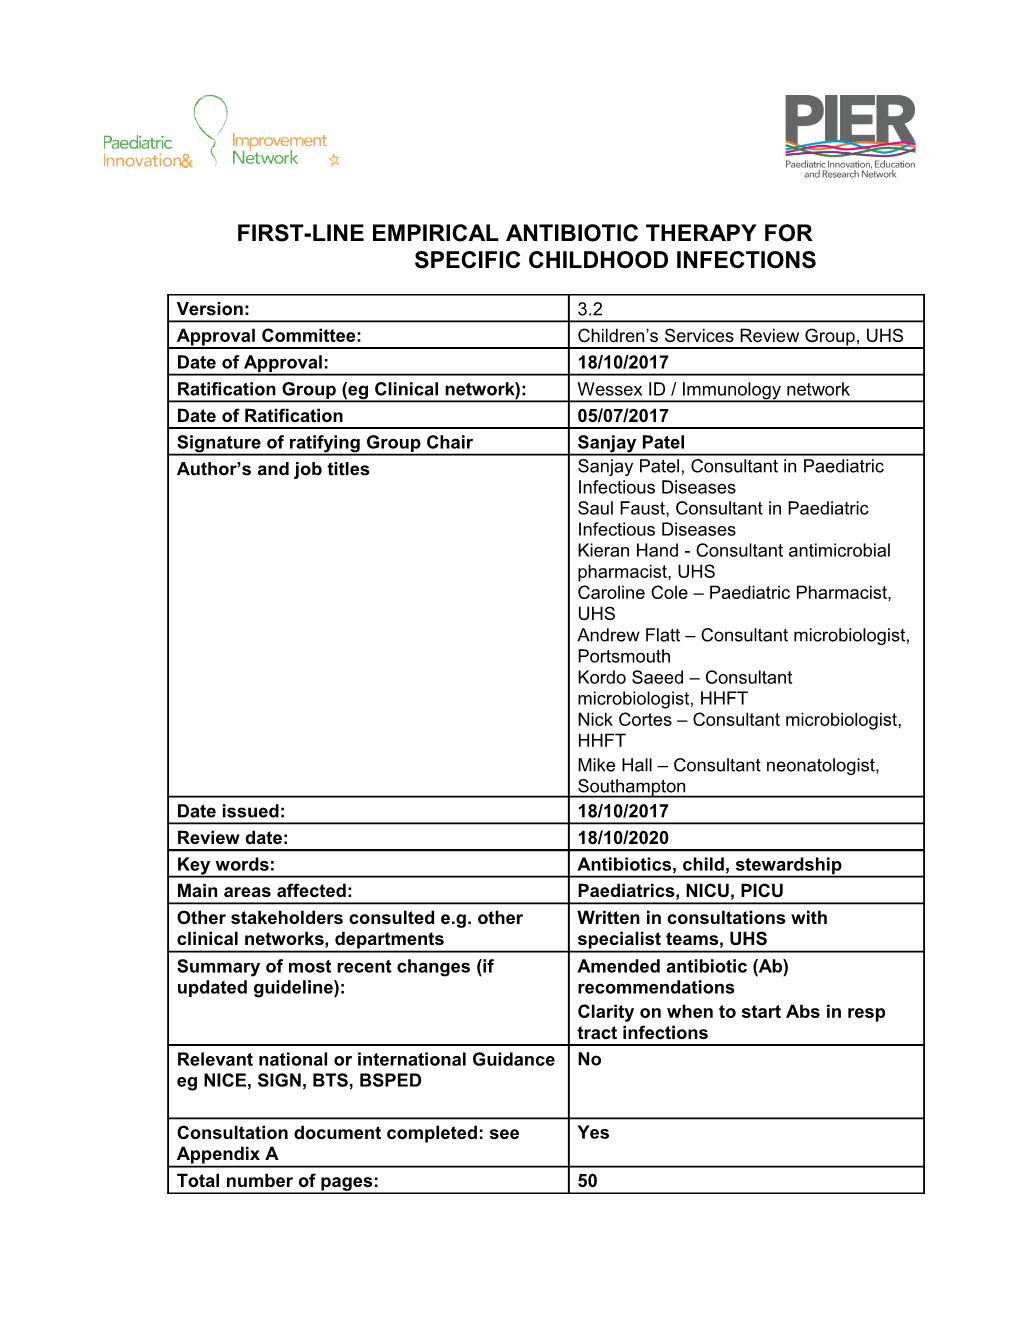 SUHT Adult Pocket Antimicrobial Guide